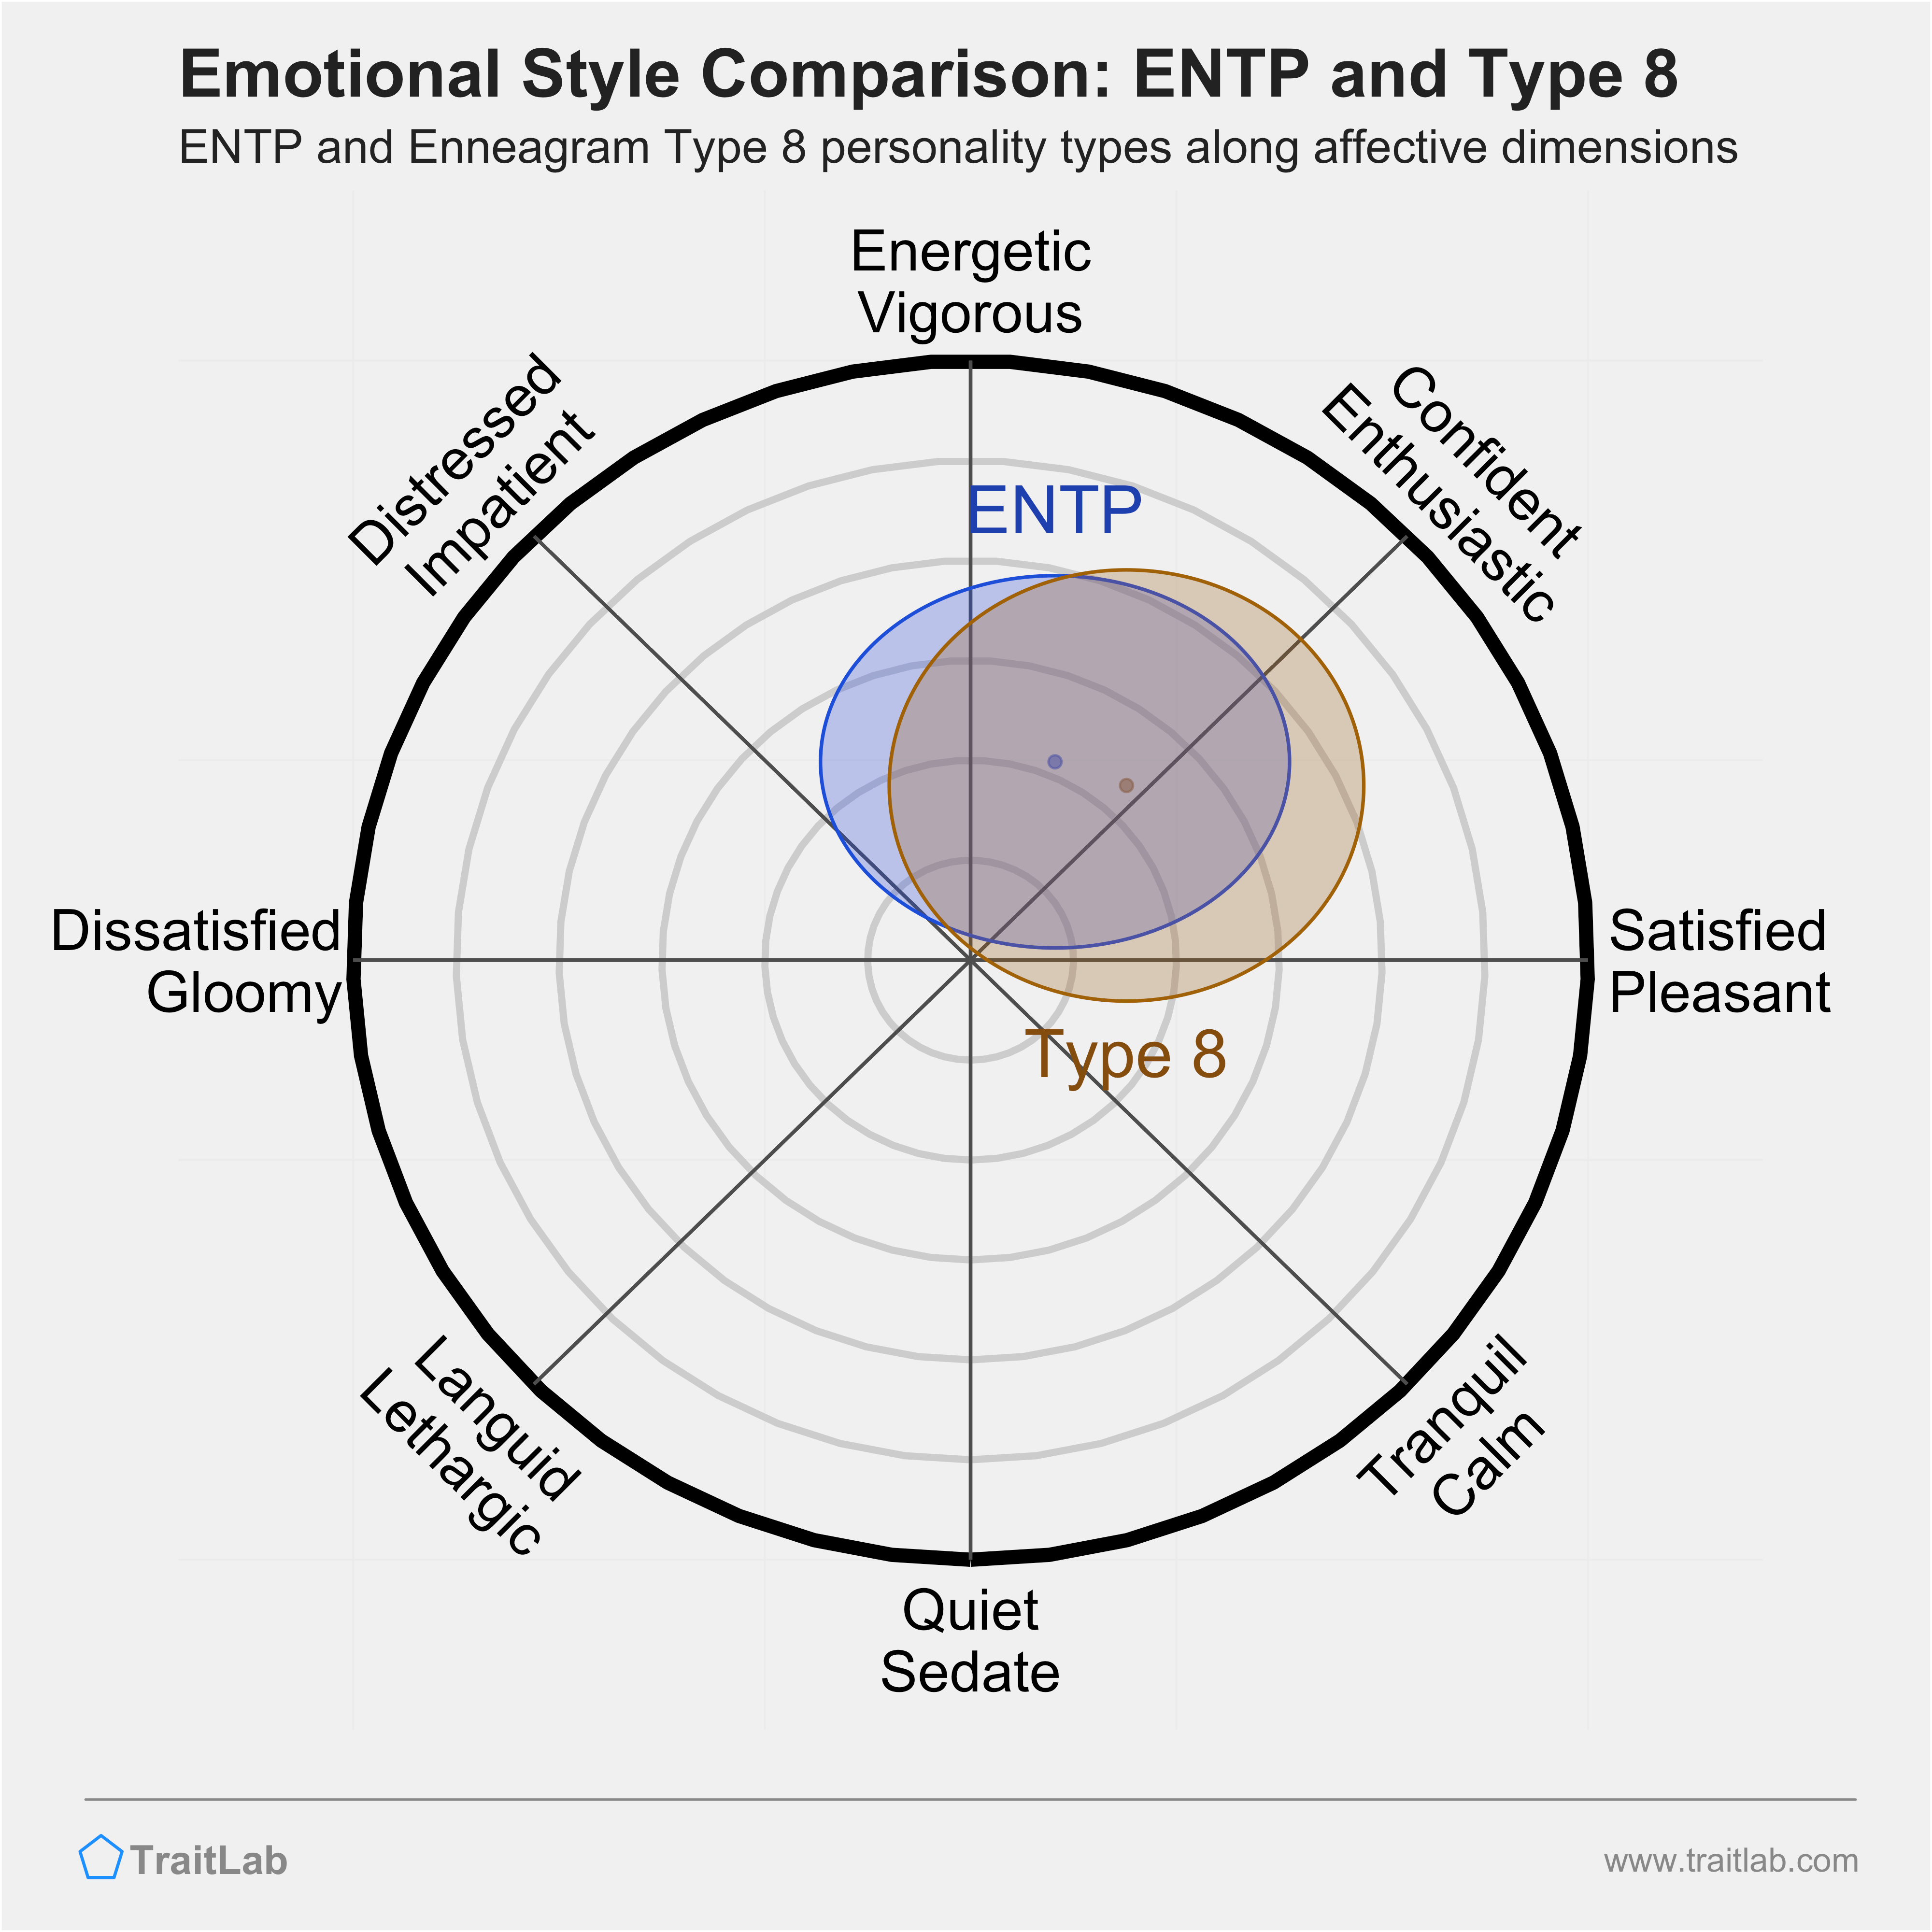 ENTP and Type 8 comparison across emotional (affective) dimensions